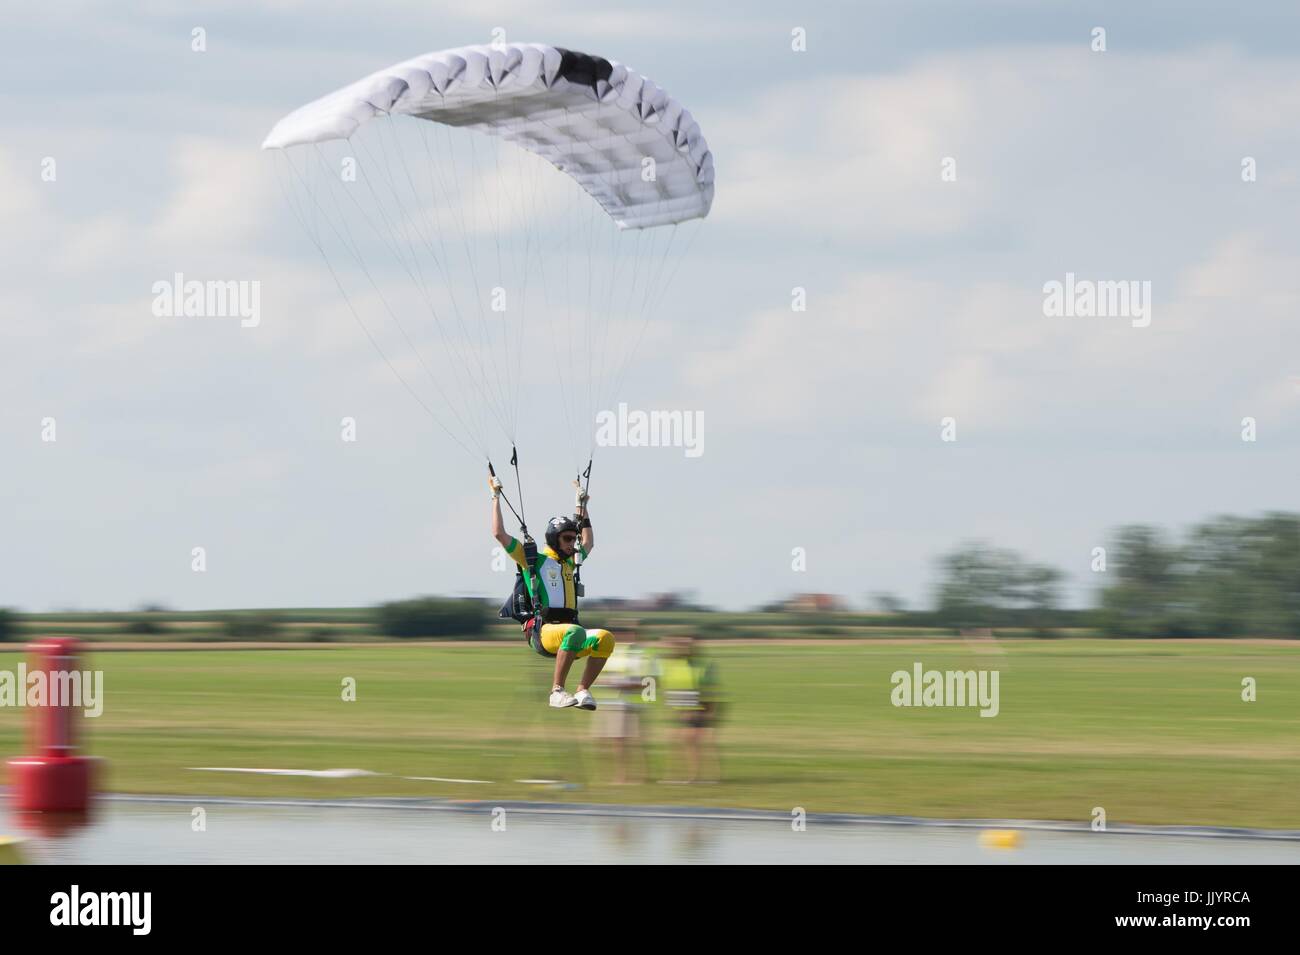 Wroclaw, Poland. 21st July, 2017. The World Games, an international multi-sport event is hold on July 20 in Wroclaw, Poland In the picture: Spadochroniarstwo Credit: East News sp. z o.o./Alamy Live News Stock Photo